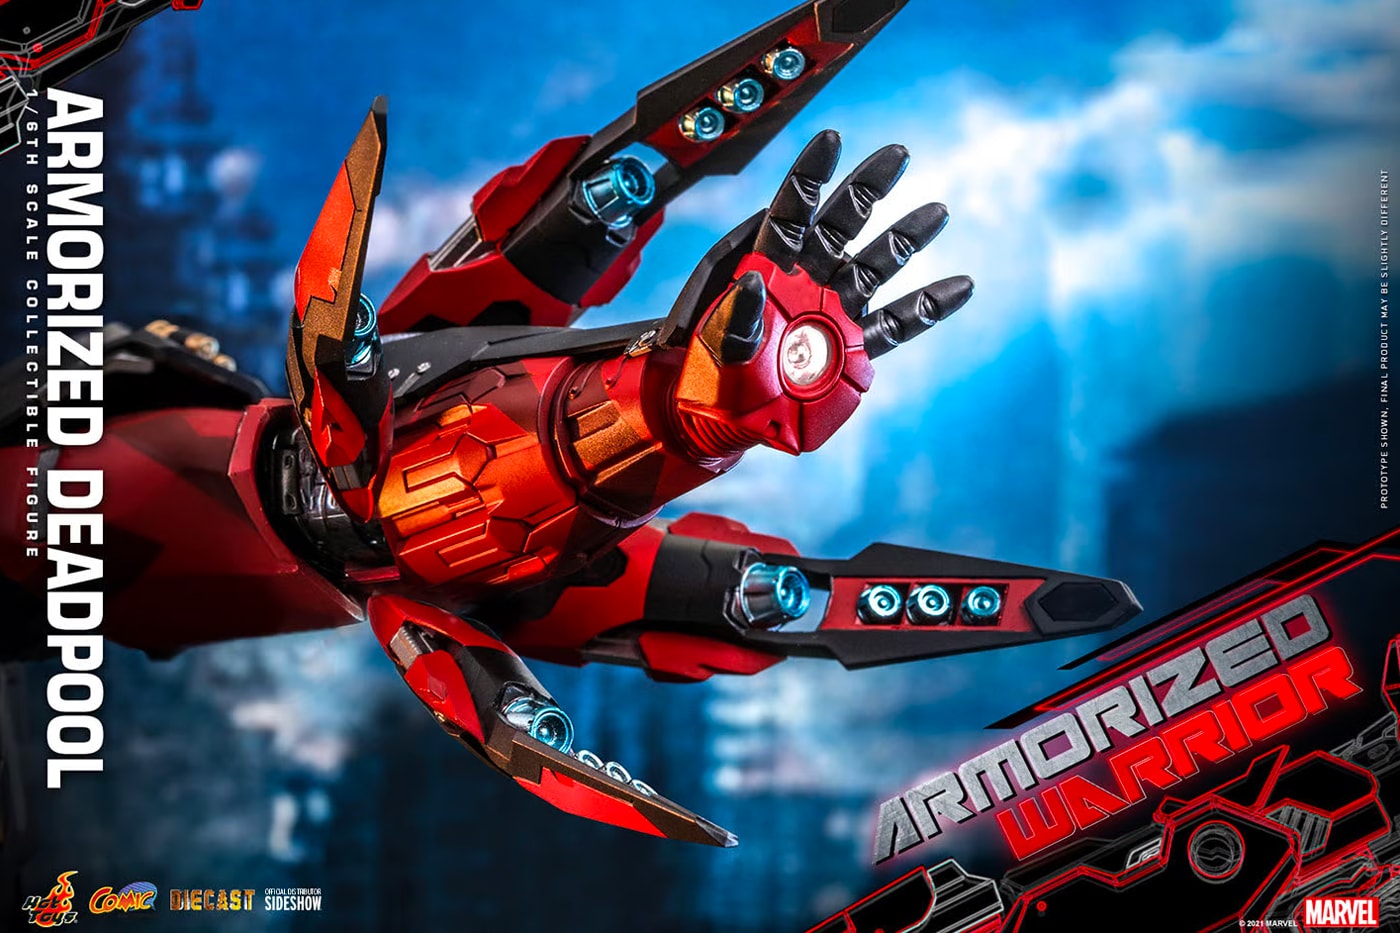 Hot Toys Armorized Deadpool 1:6th Scale Figure Release Info Date Buy Price 